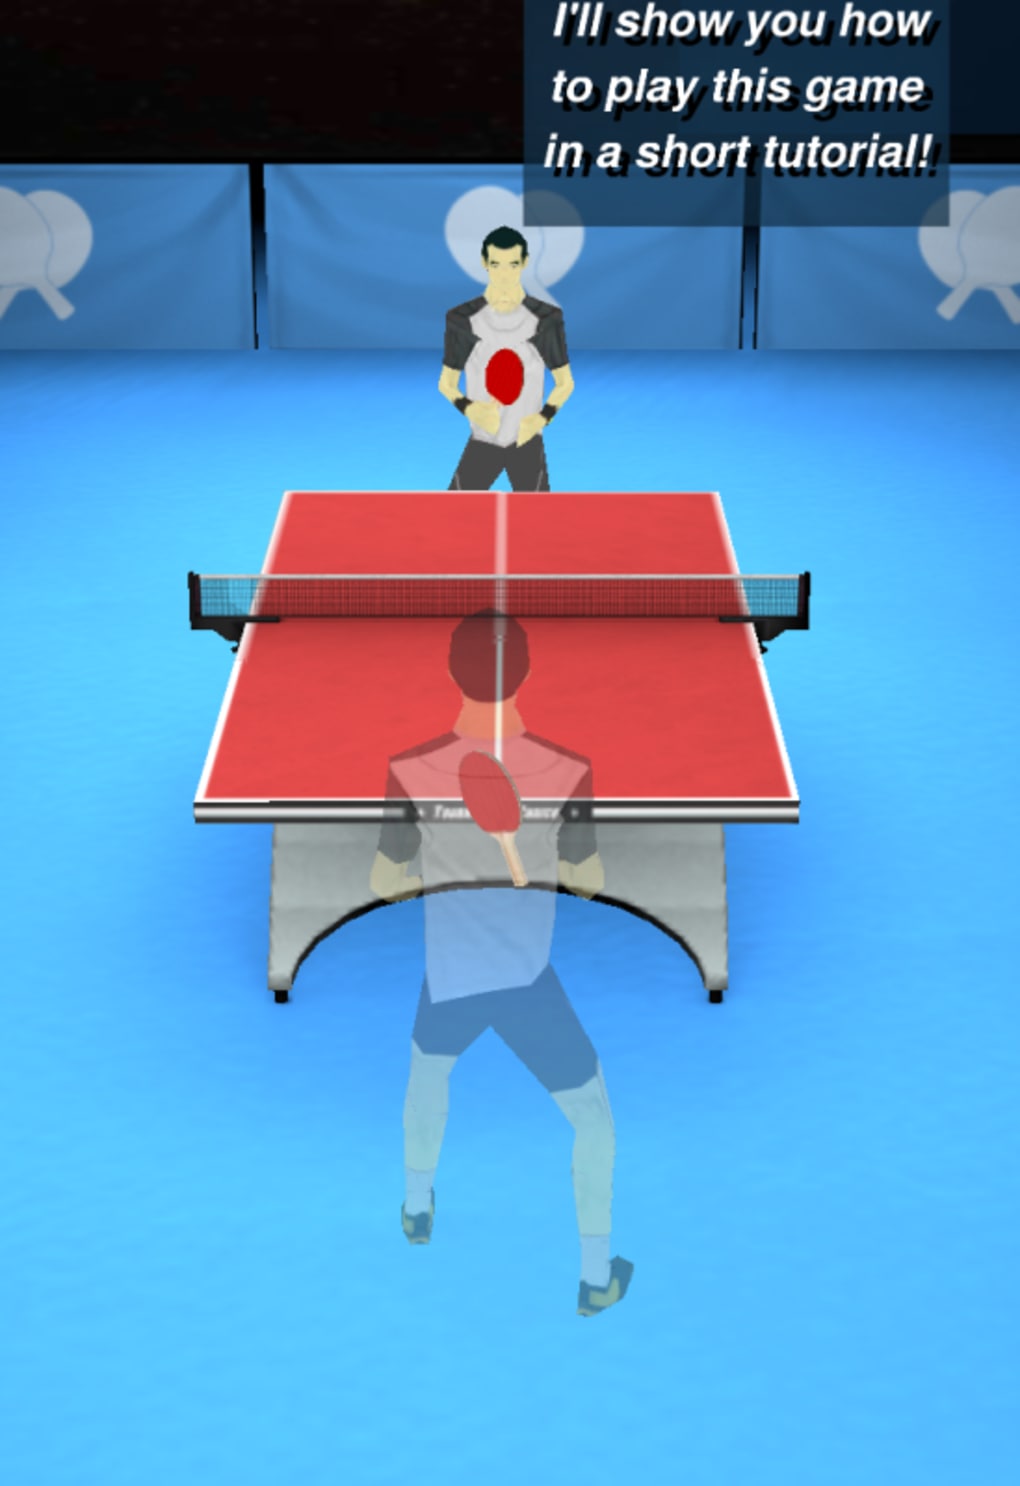 Ping Pong Fury (by Yakuto) - free online multiplayer ping pong game for  Android and iOS - gameplay. 